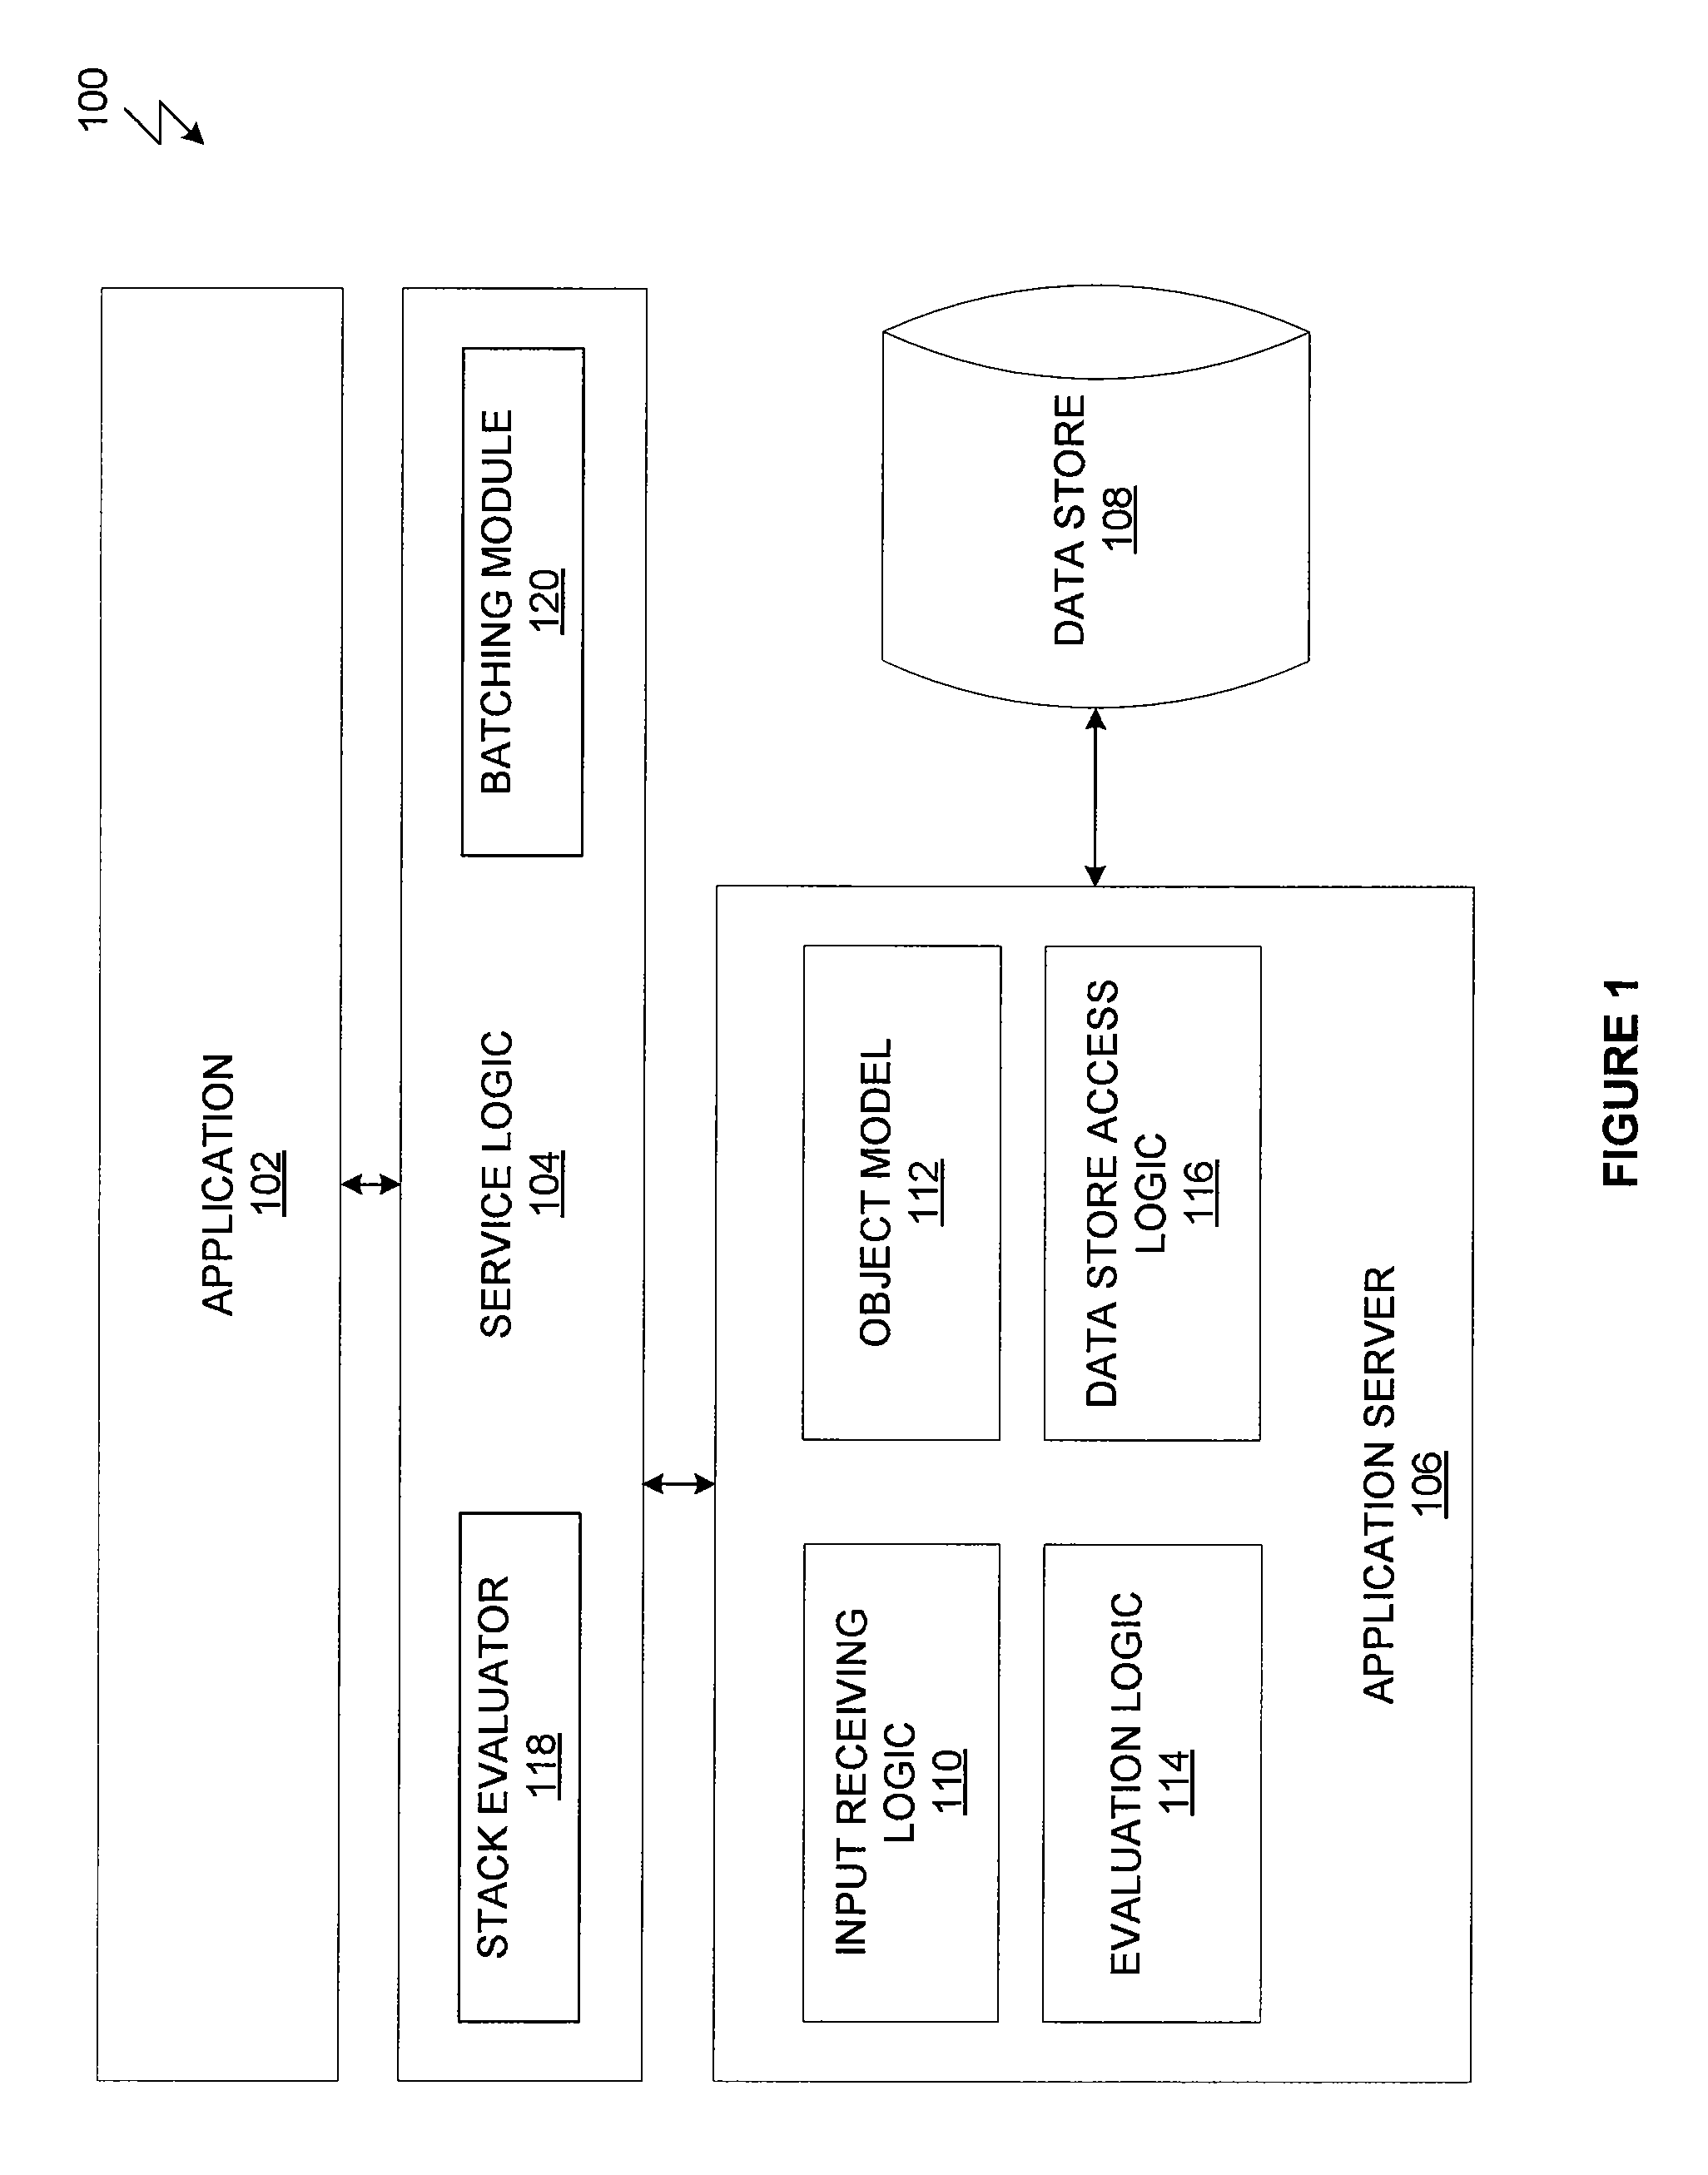 System and method for batch evaluation programs